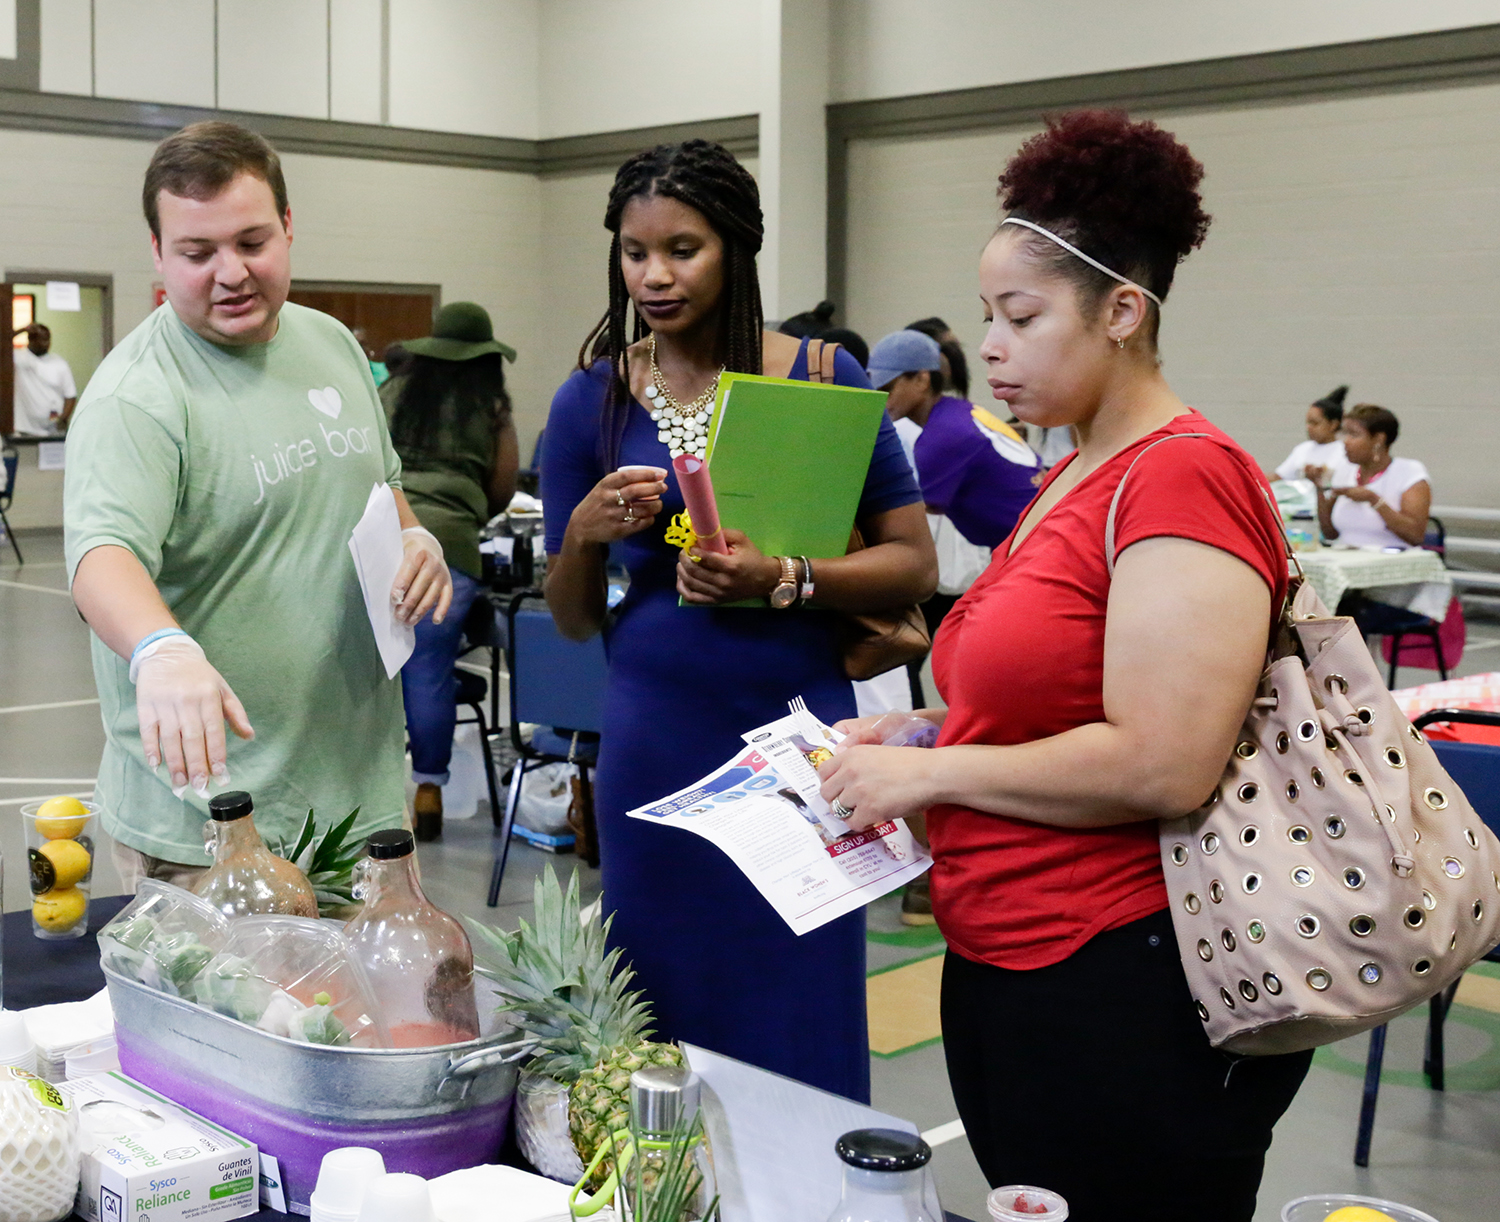 Tuscaloosa’s Juice Bar provided a variety of juice samples during the Healthy Eating Expo.